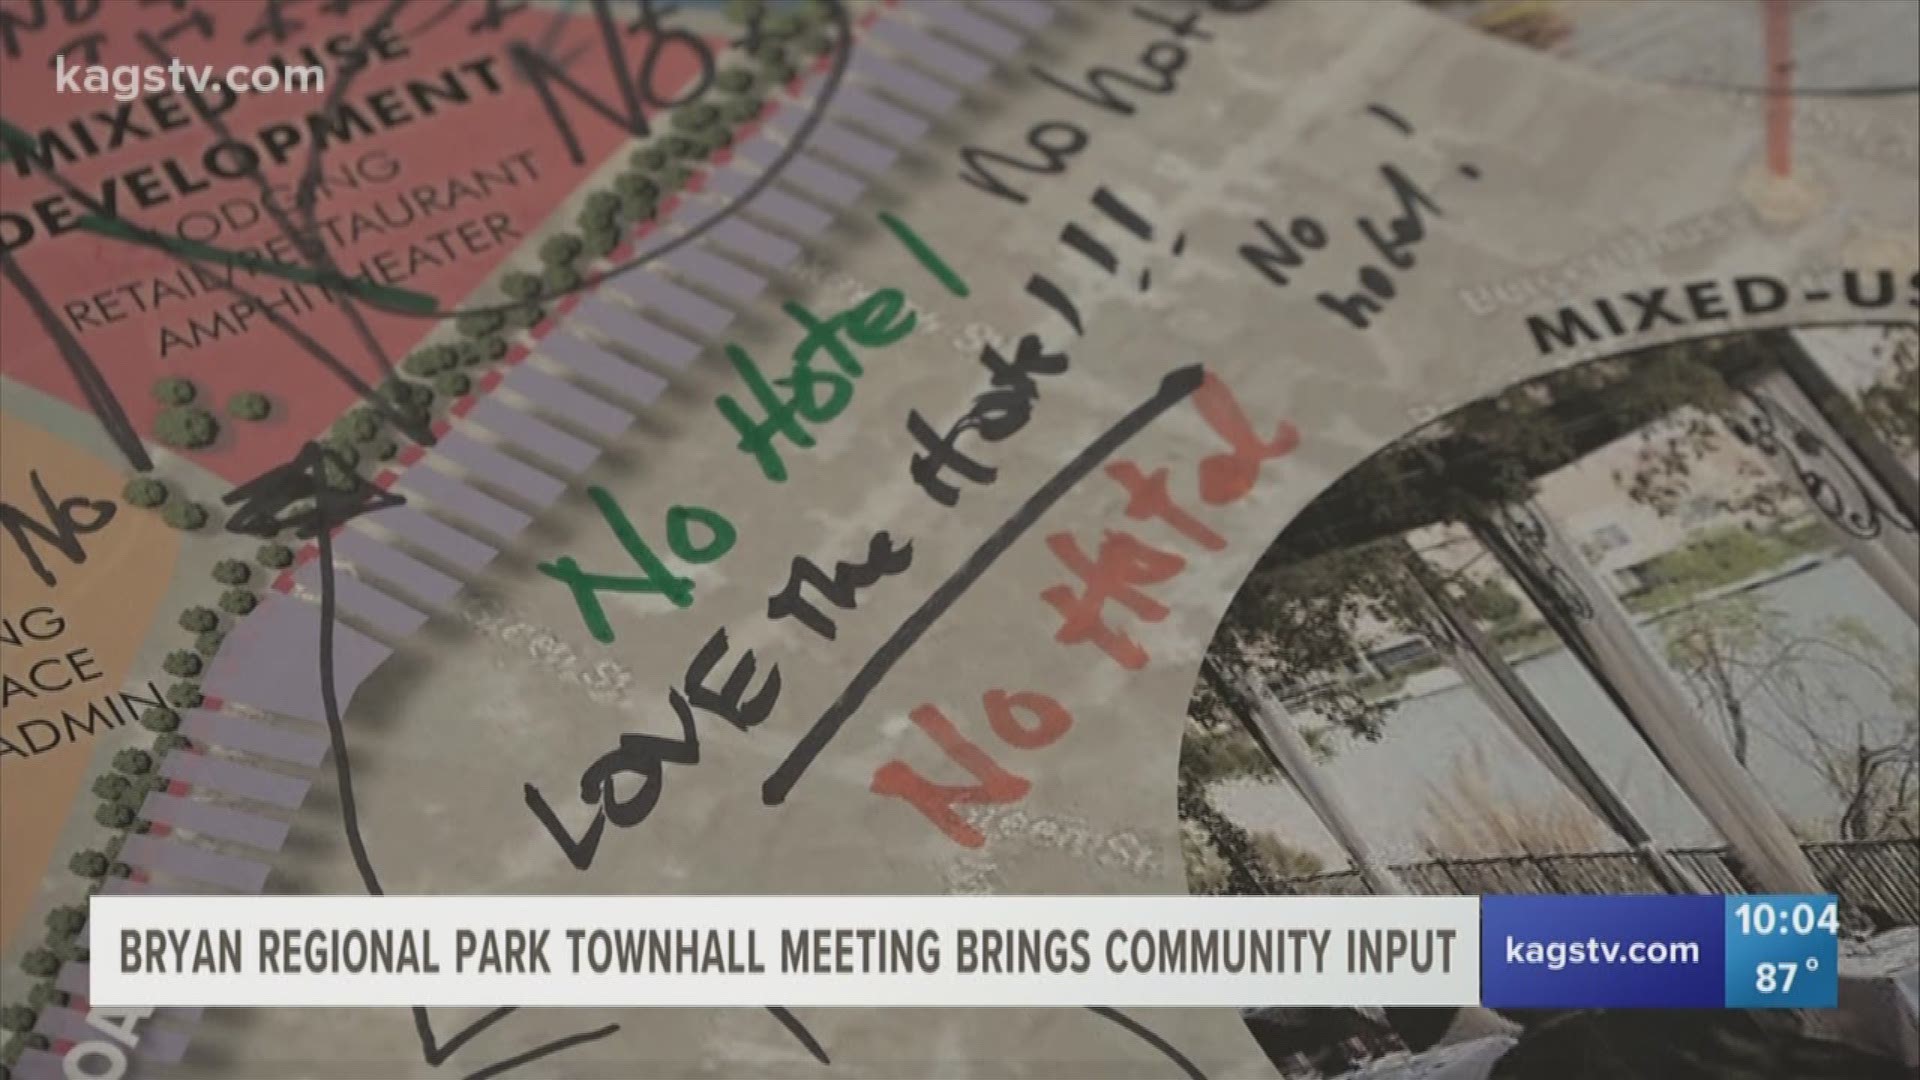 Community members learned about plans for the Bryan Regional Park and gave their own suggestions.